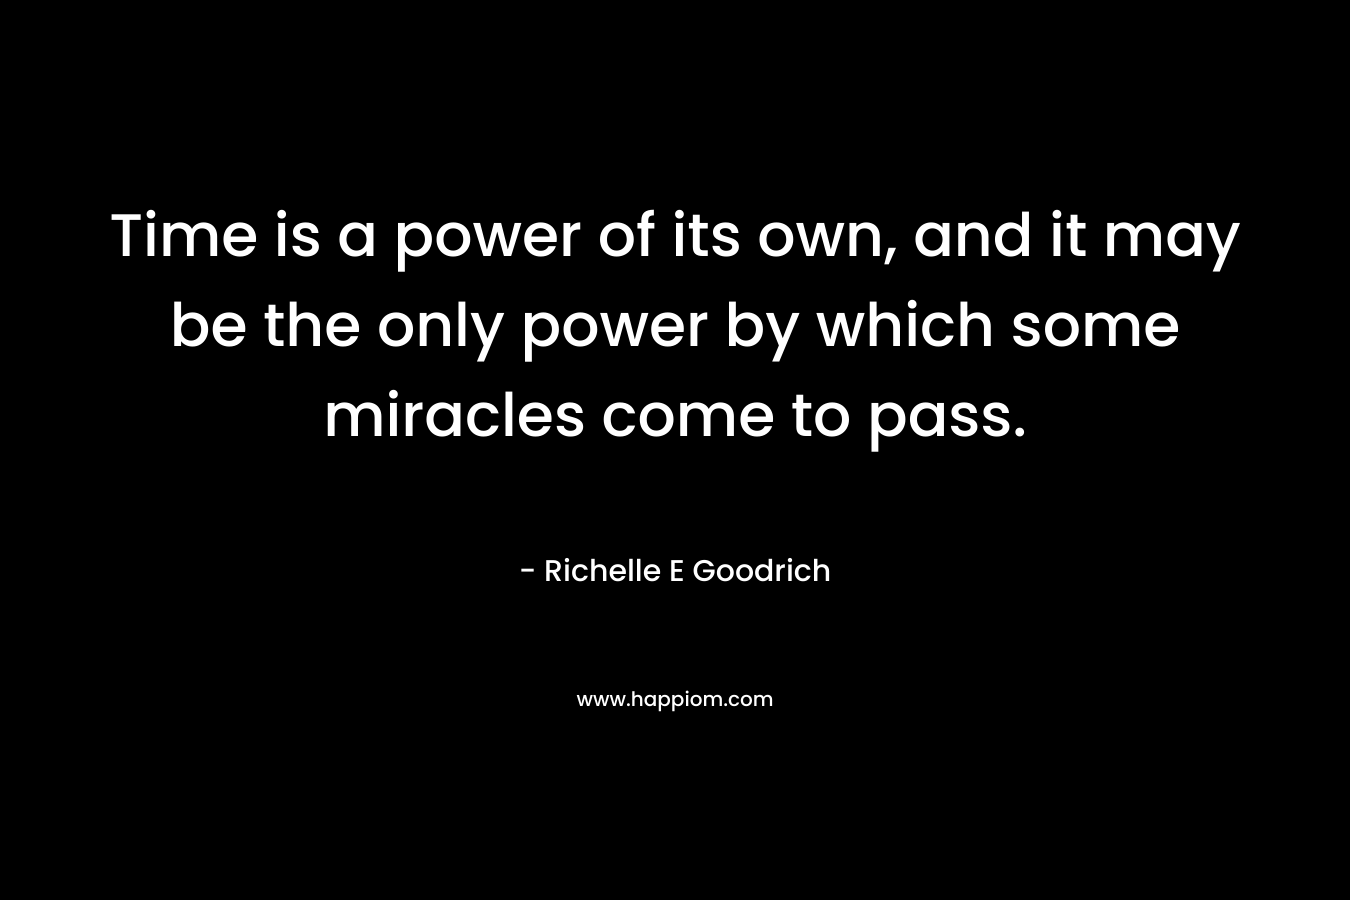 Time is a power of its own, and it may be the only power by which some miracles come to pass.